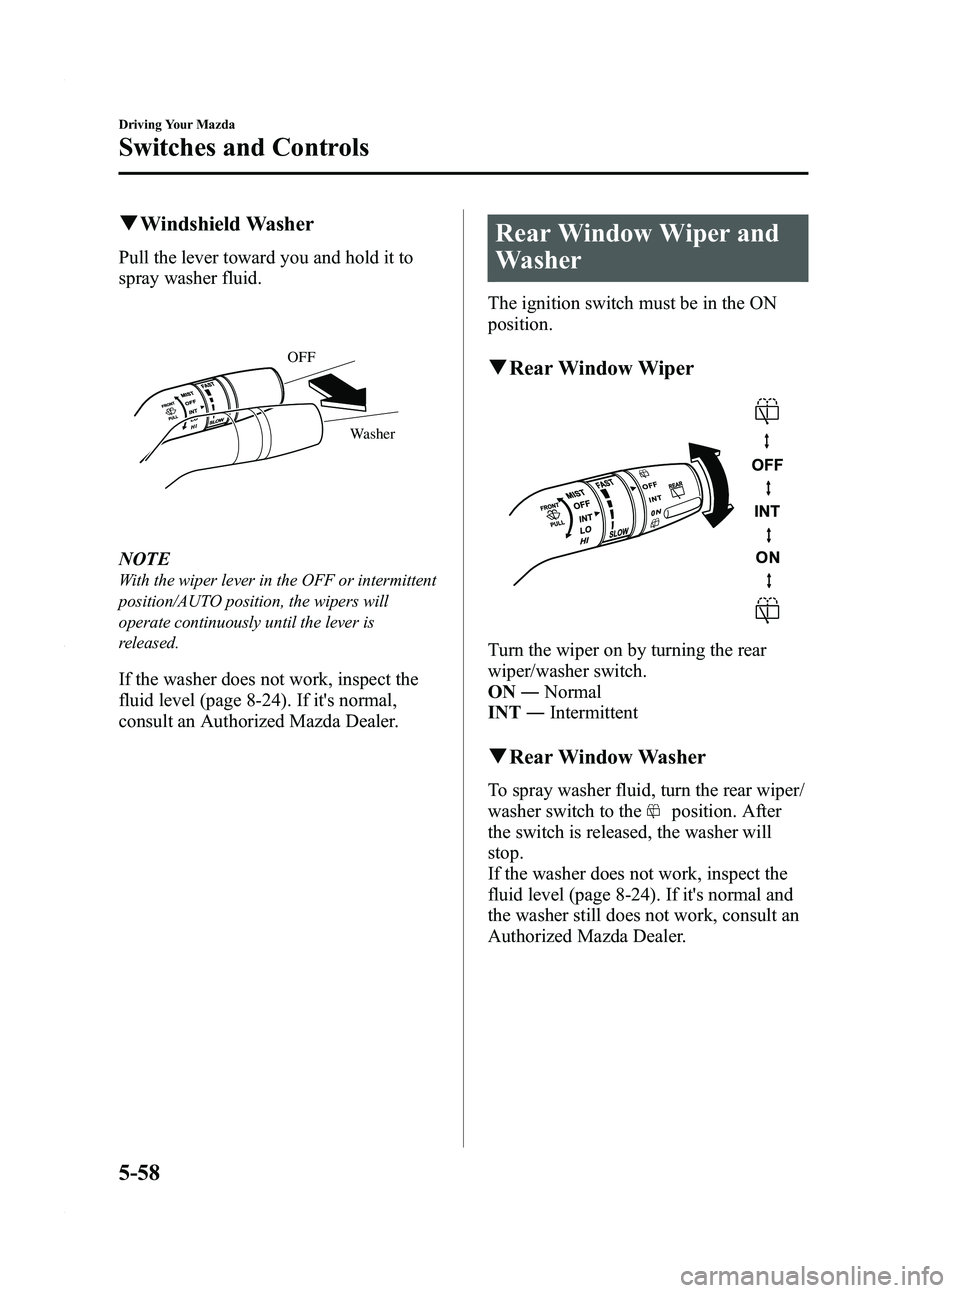 MAZDA MODEL 5 2010  Owners Manual Black plate (166,1)
qWindshield Washer
Pull the lever toward you and hold it to
spray washer fluid.
Washer
OFF
NOTE
With the wiper lever in the OFF or intermittent
position/AUTO position, the wipers w